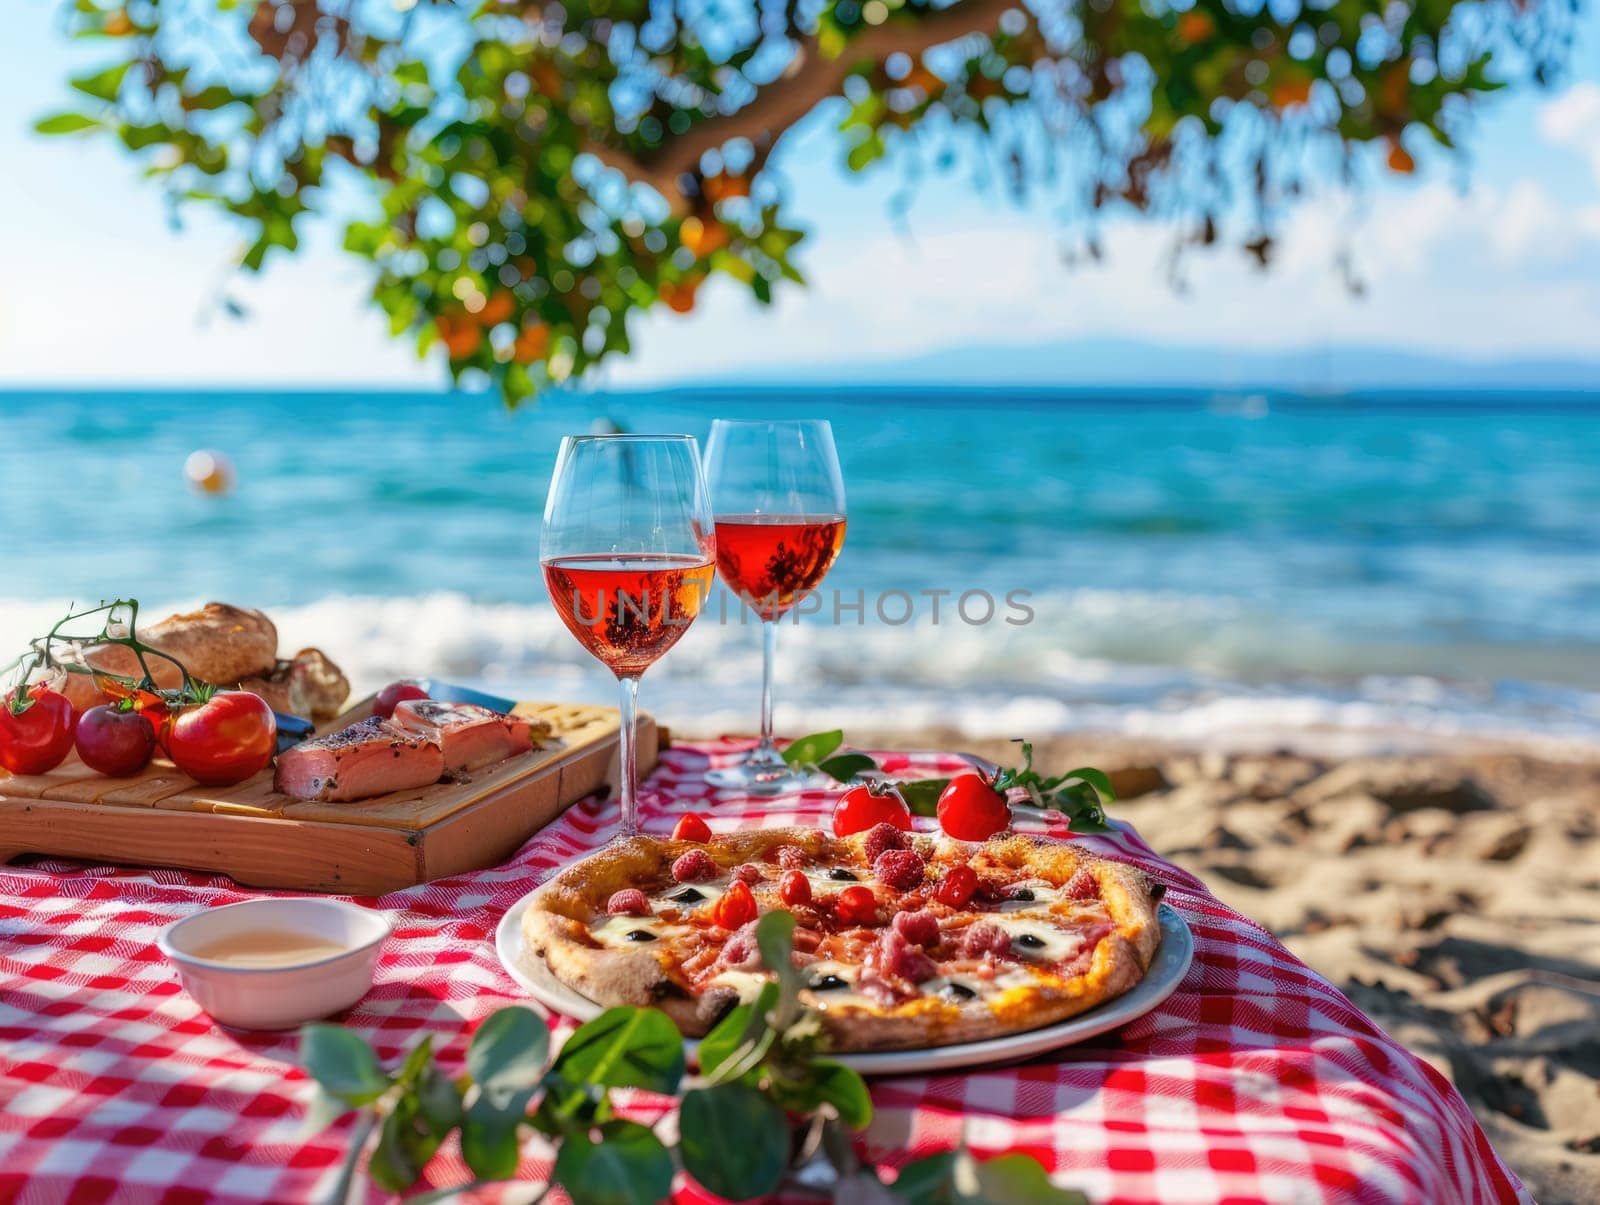 Seaside picnic with red wine in glasses, pepperoni pizza, and fresh grapes on checkered blanket. Romantic outdoor dining concept with a sea view and natural setting. Ai generation by Lunnica